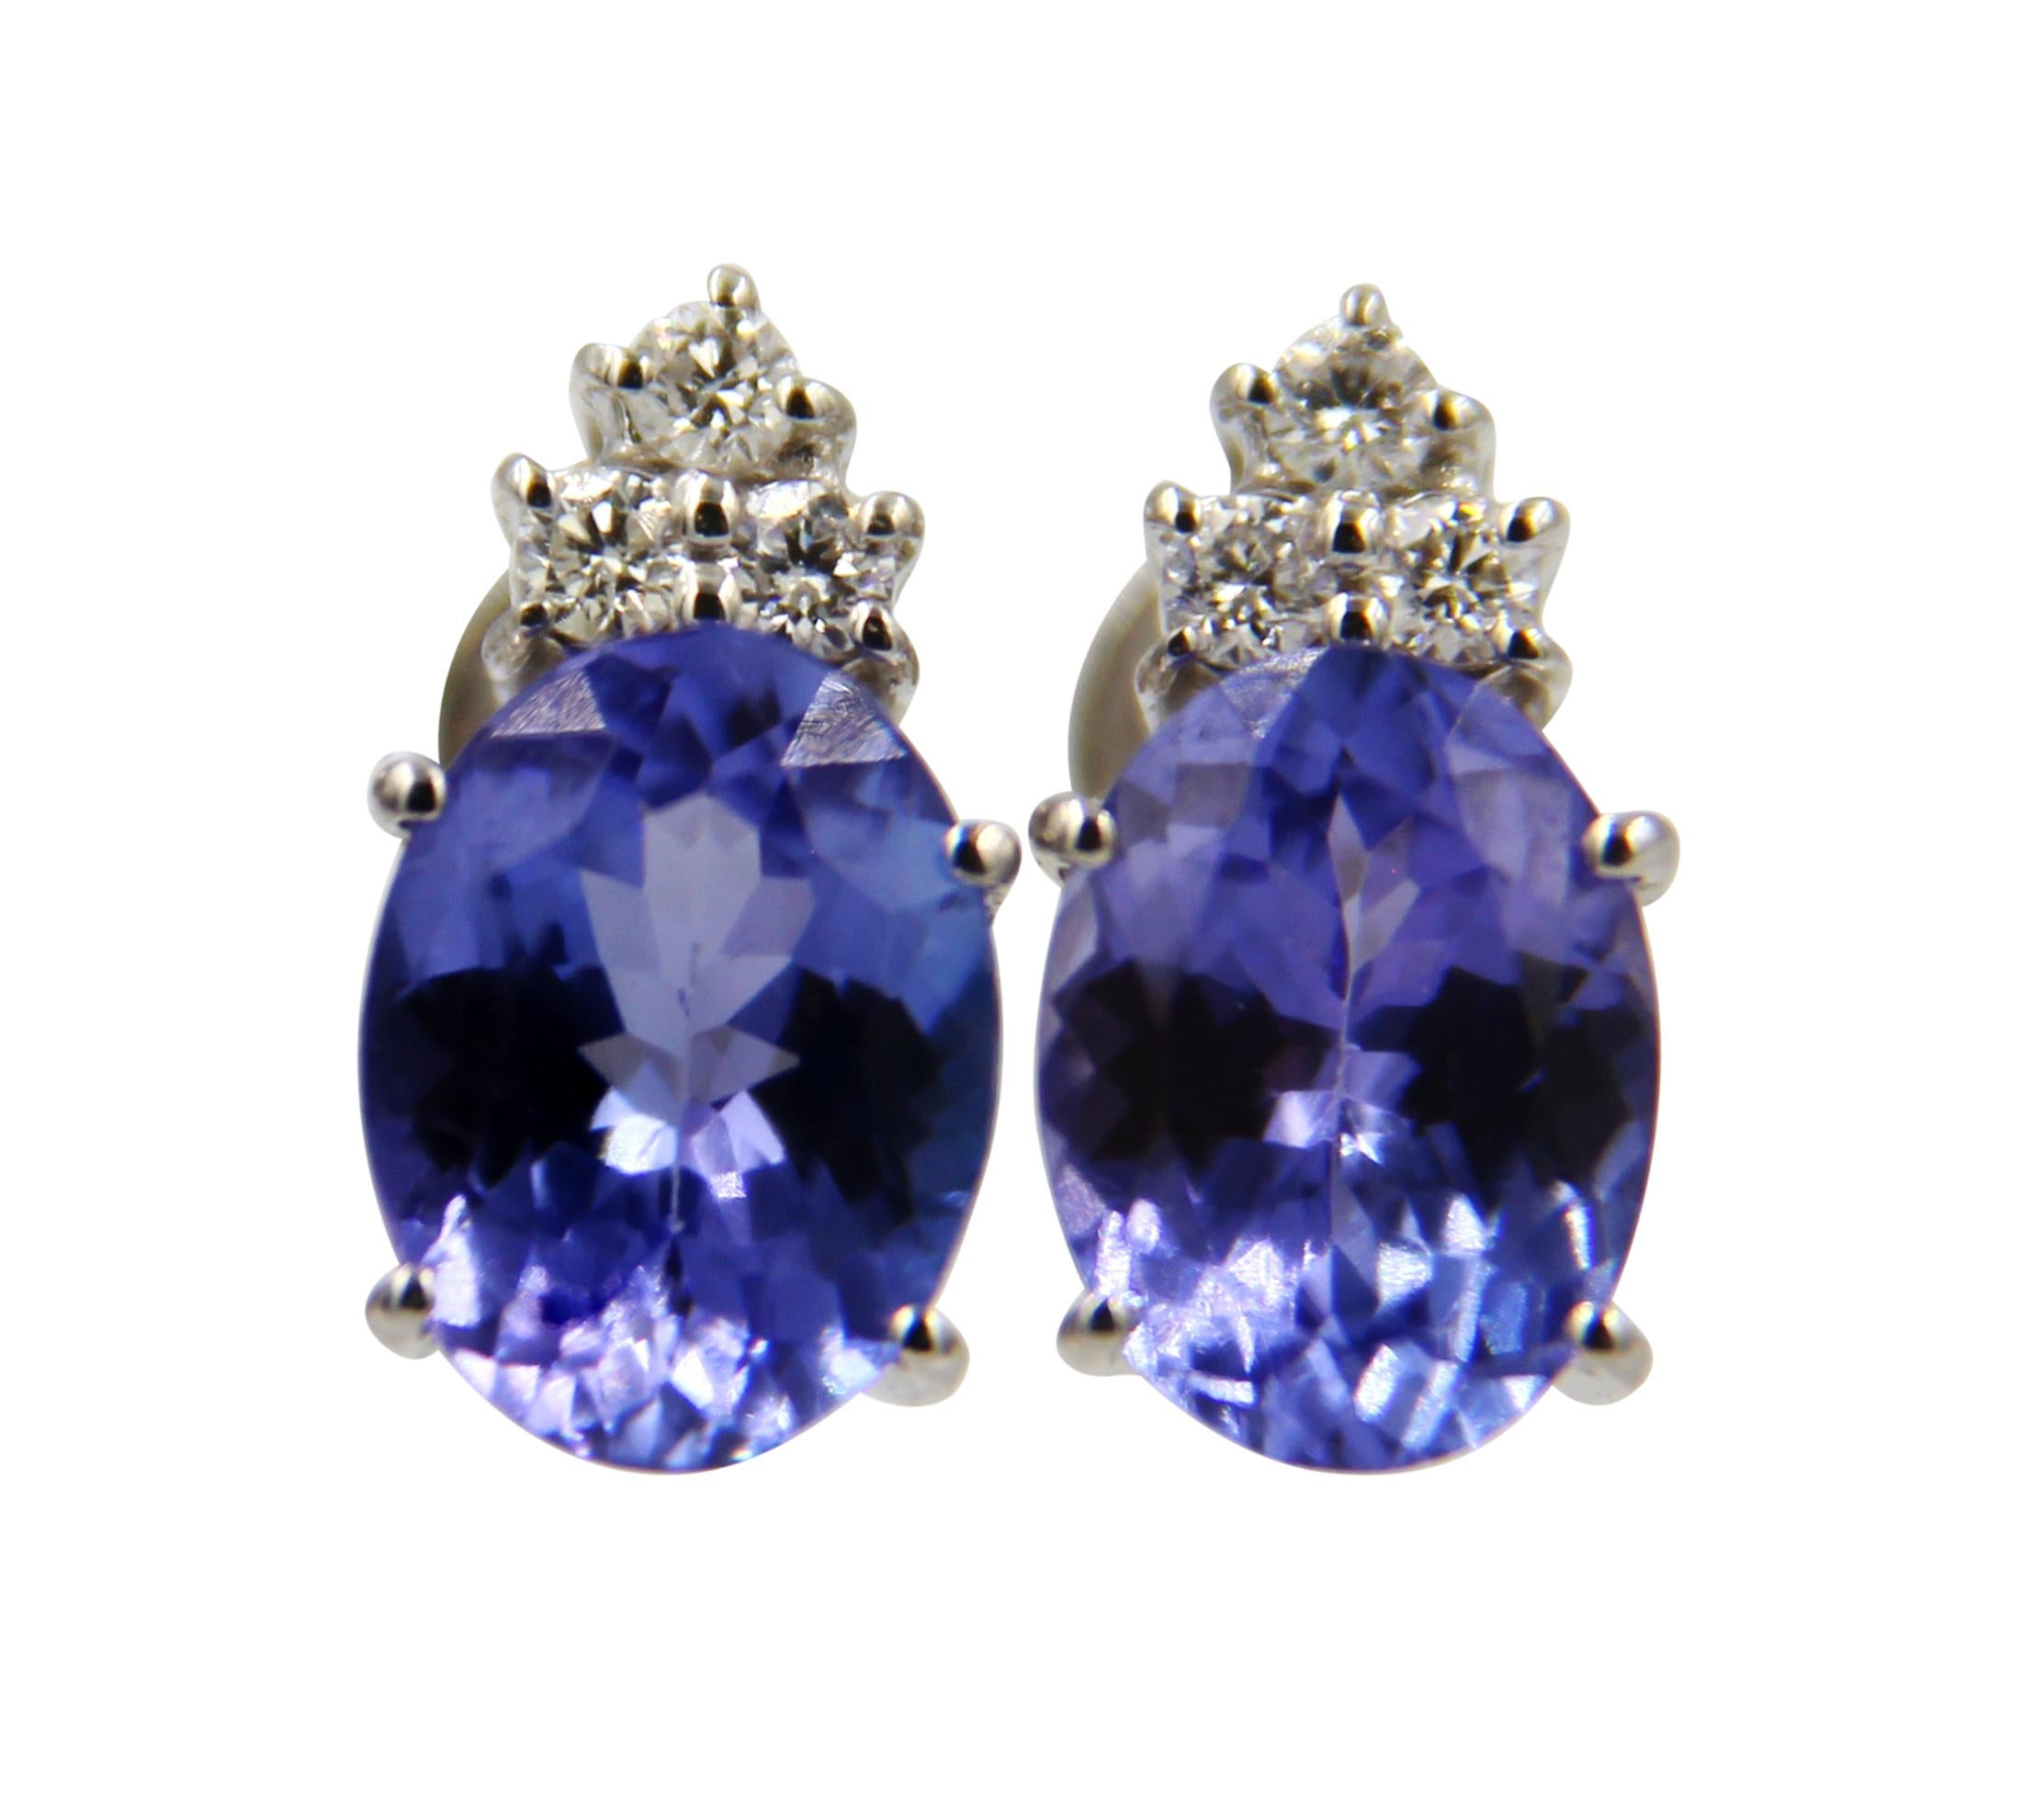 A beautiful pair of Earrings featuring 2.25 Carat Oval Shaped Tanzanite and 0.12 Carat Diamonds set in 18 Karat White Gold.
